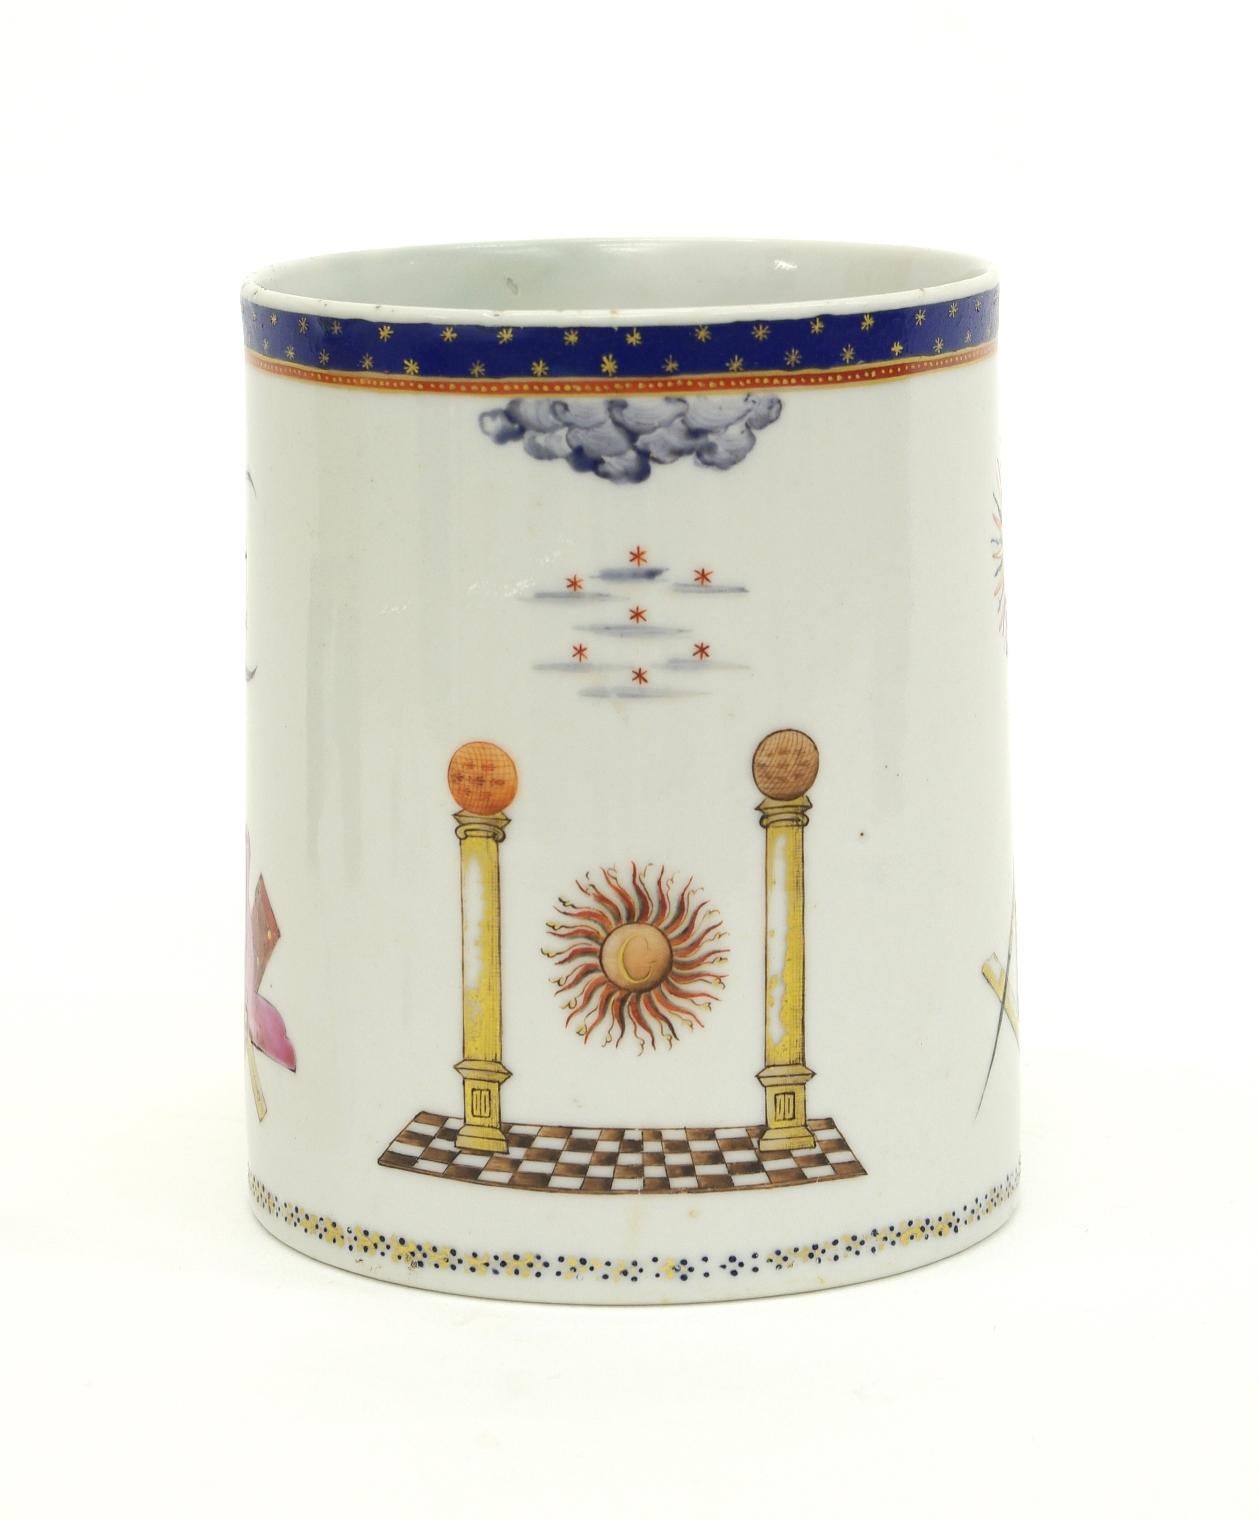 Chinese export porcelain Masonic cider mug, the cylindrical body with a double strap handle, decorated overall with Masonic emblems beneath a blue enamel band with gilt stars. Bears an S. Marchant & Son label to the bottom.

Restored chip to the